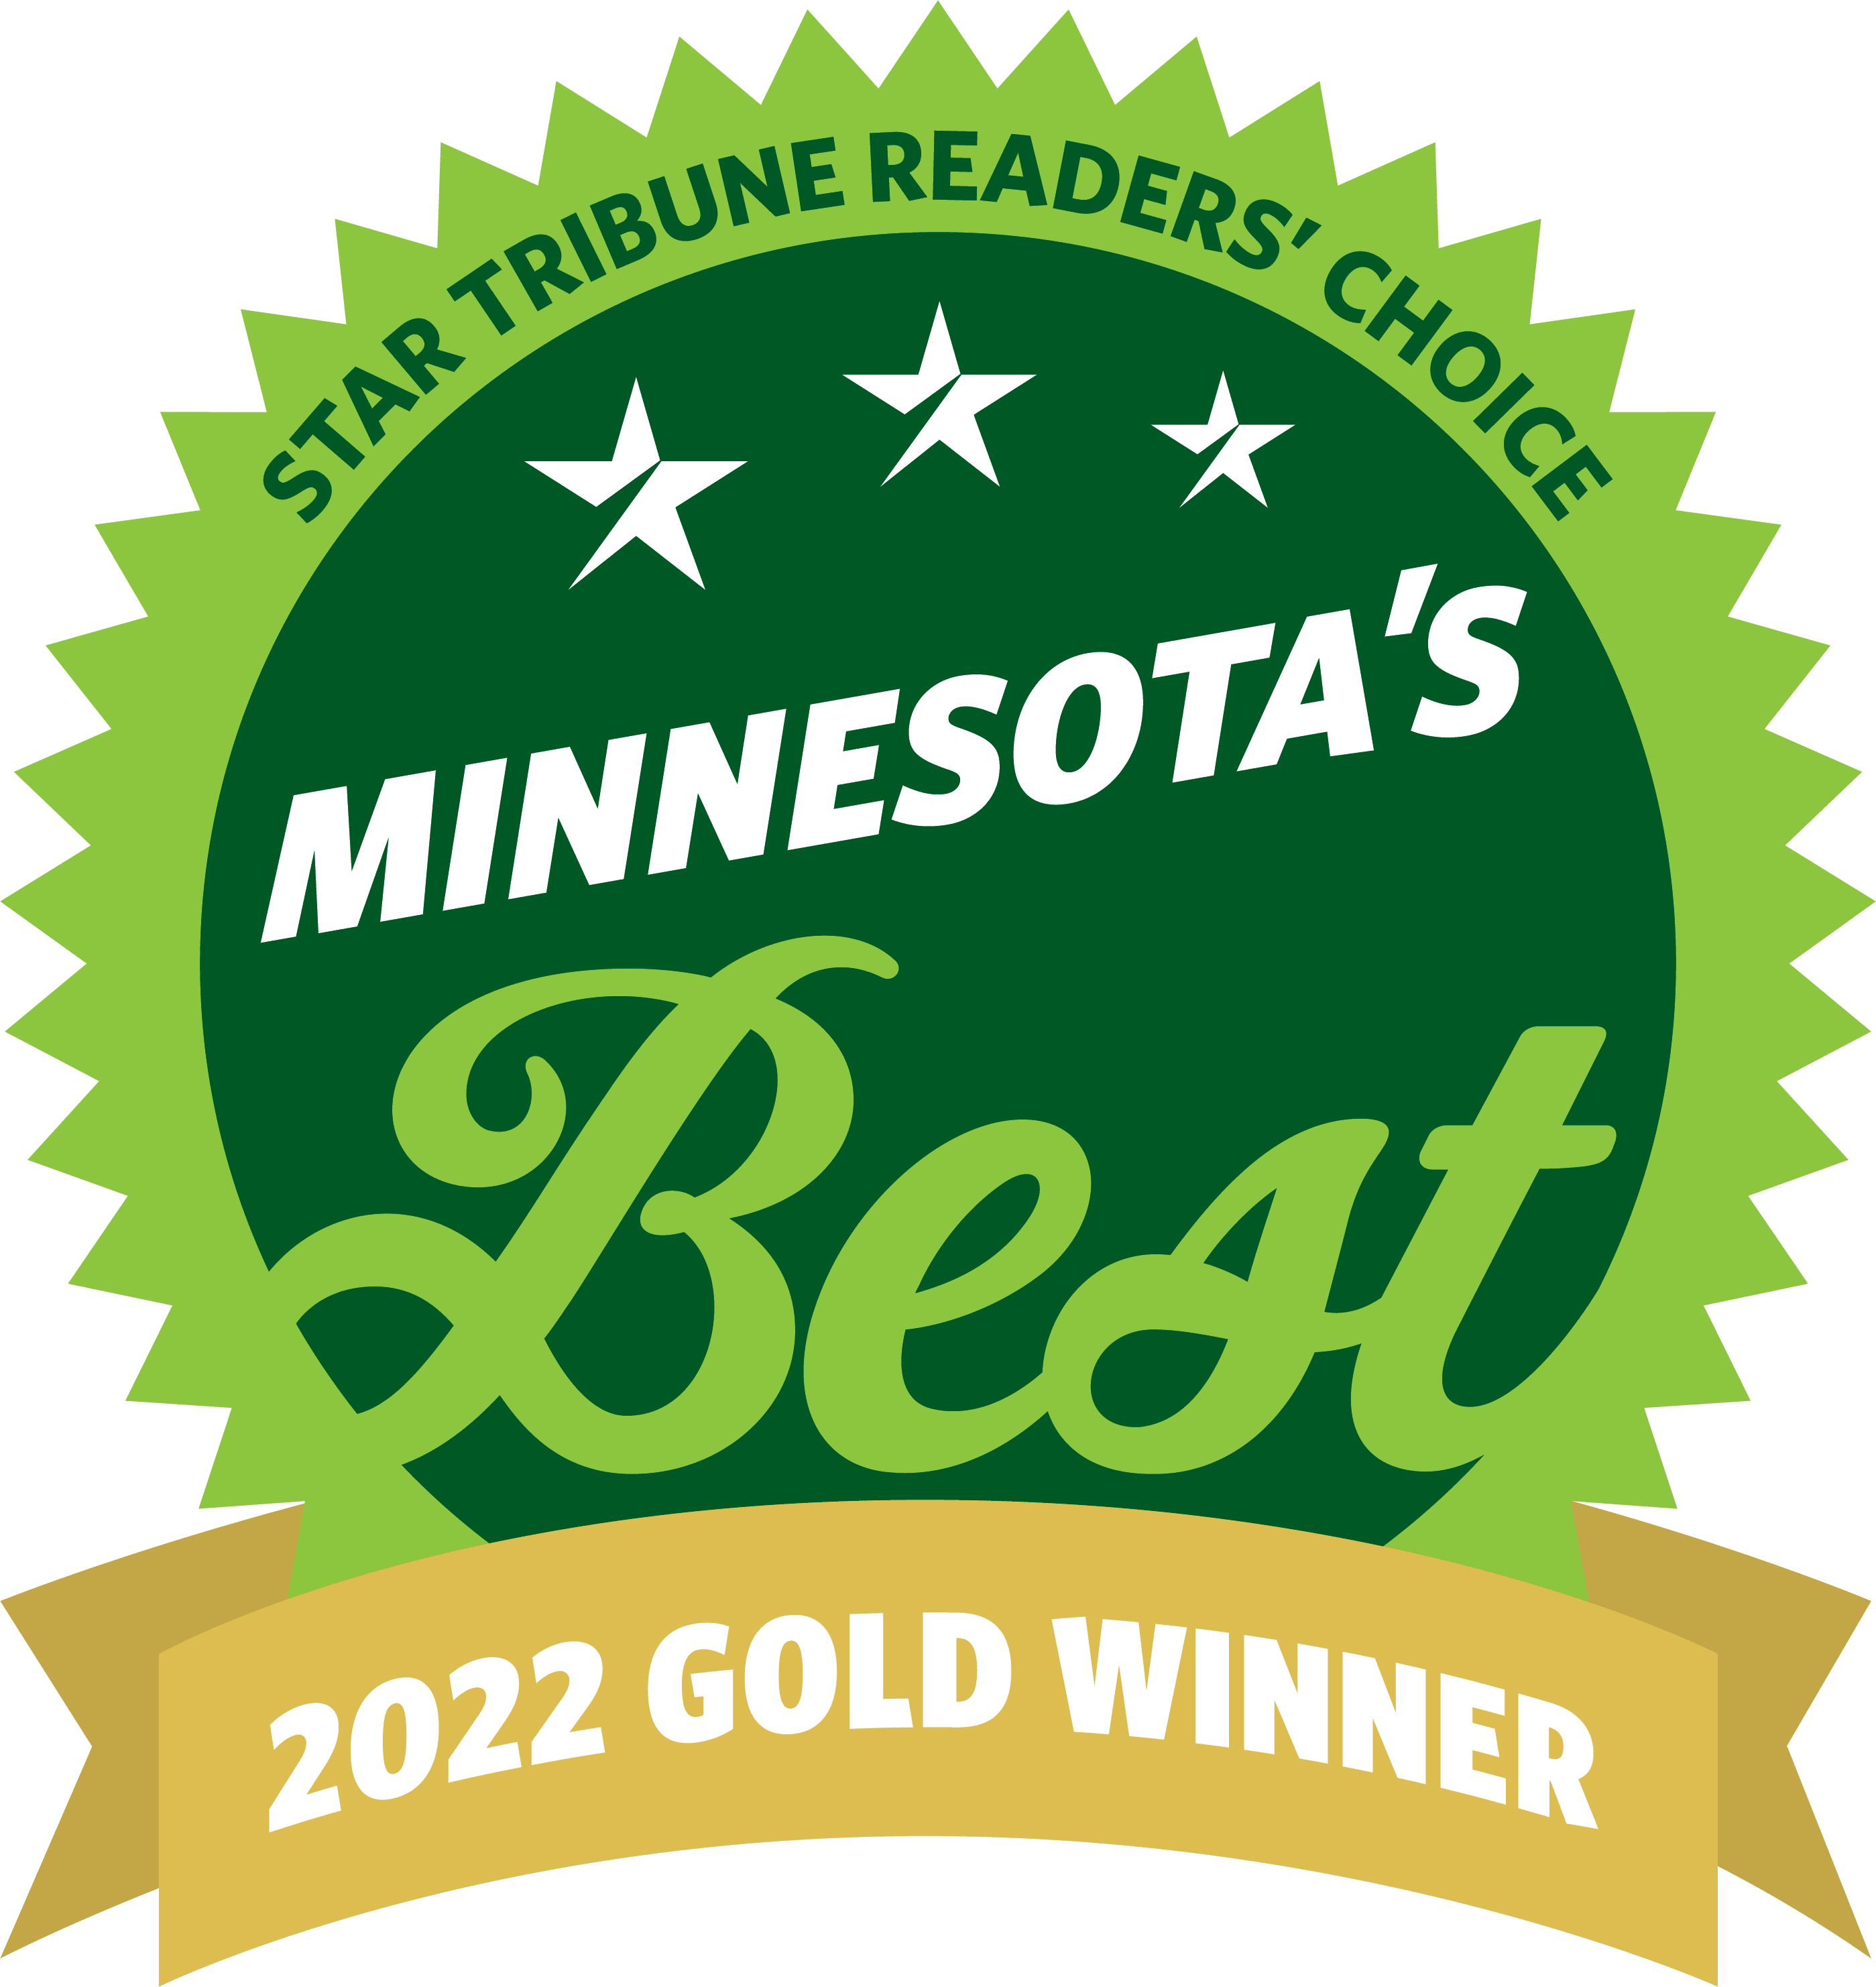 Minnesota Best Award for Applewood Pointe of Bloomington at Valley West 